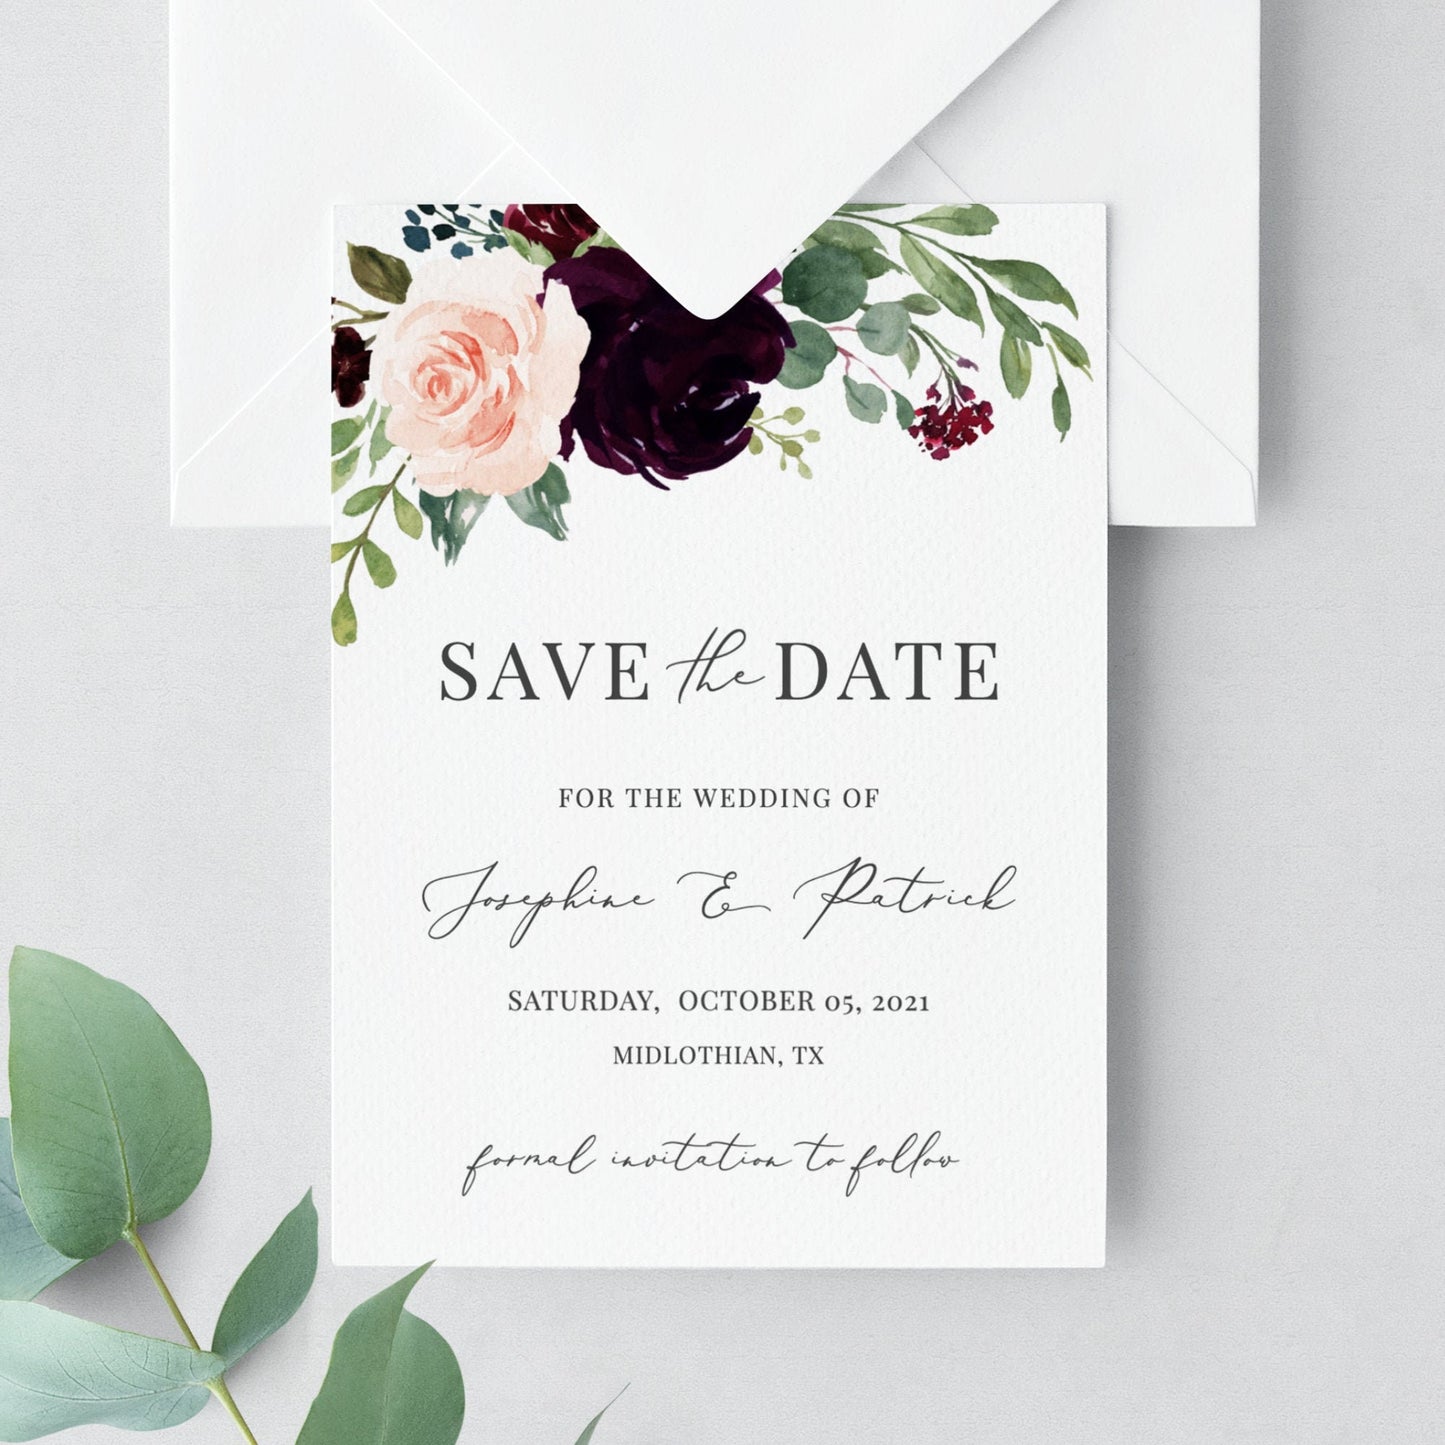 Editable Burgundy Save the Date Floral Save the Date Cards Wedding Announcement Text Digital Template